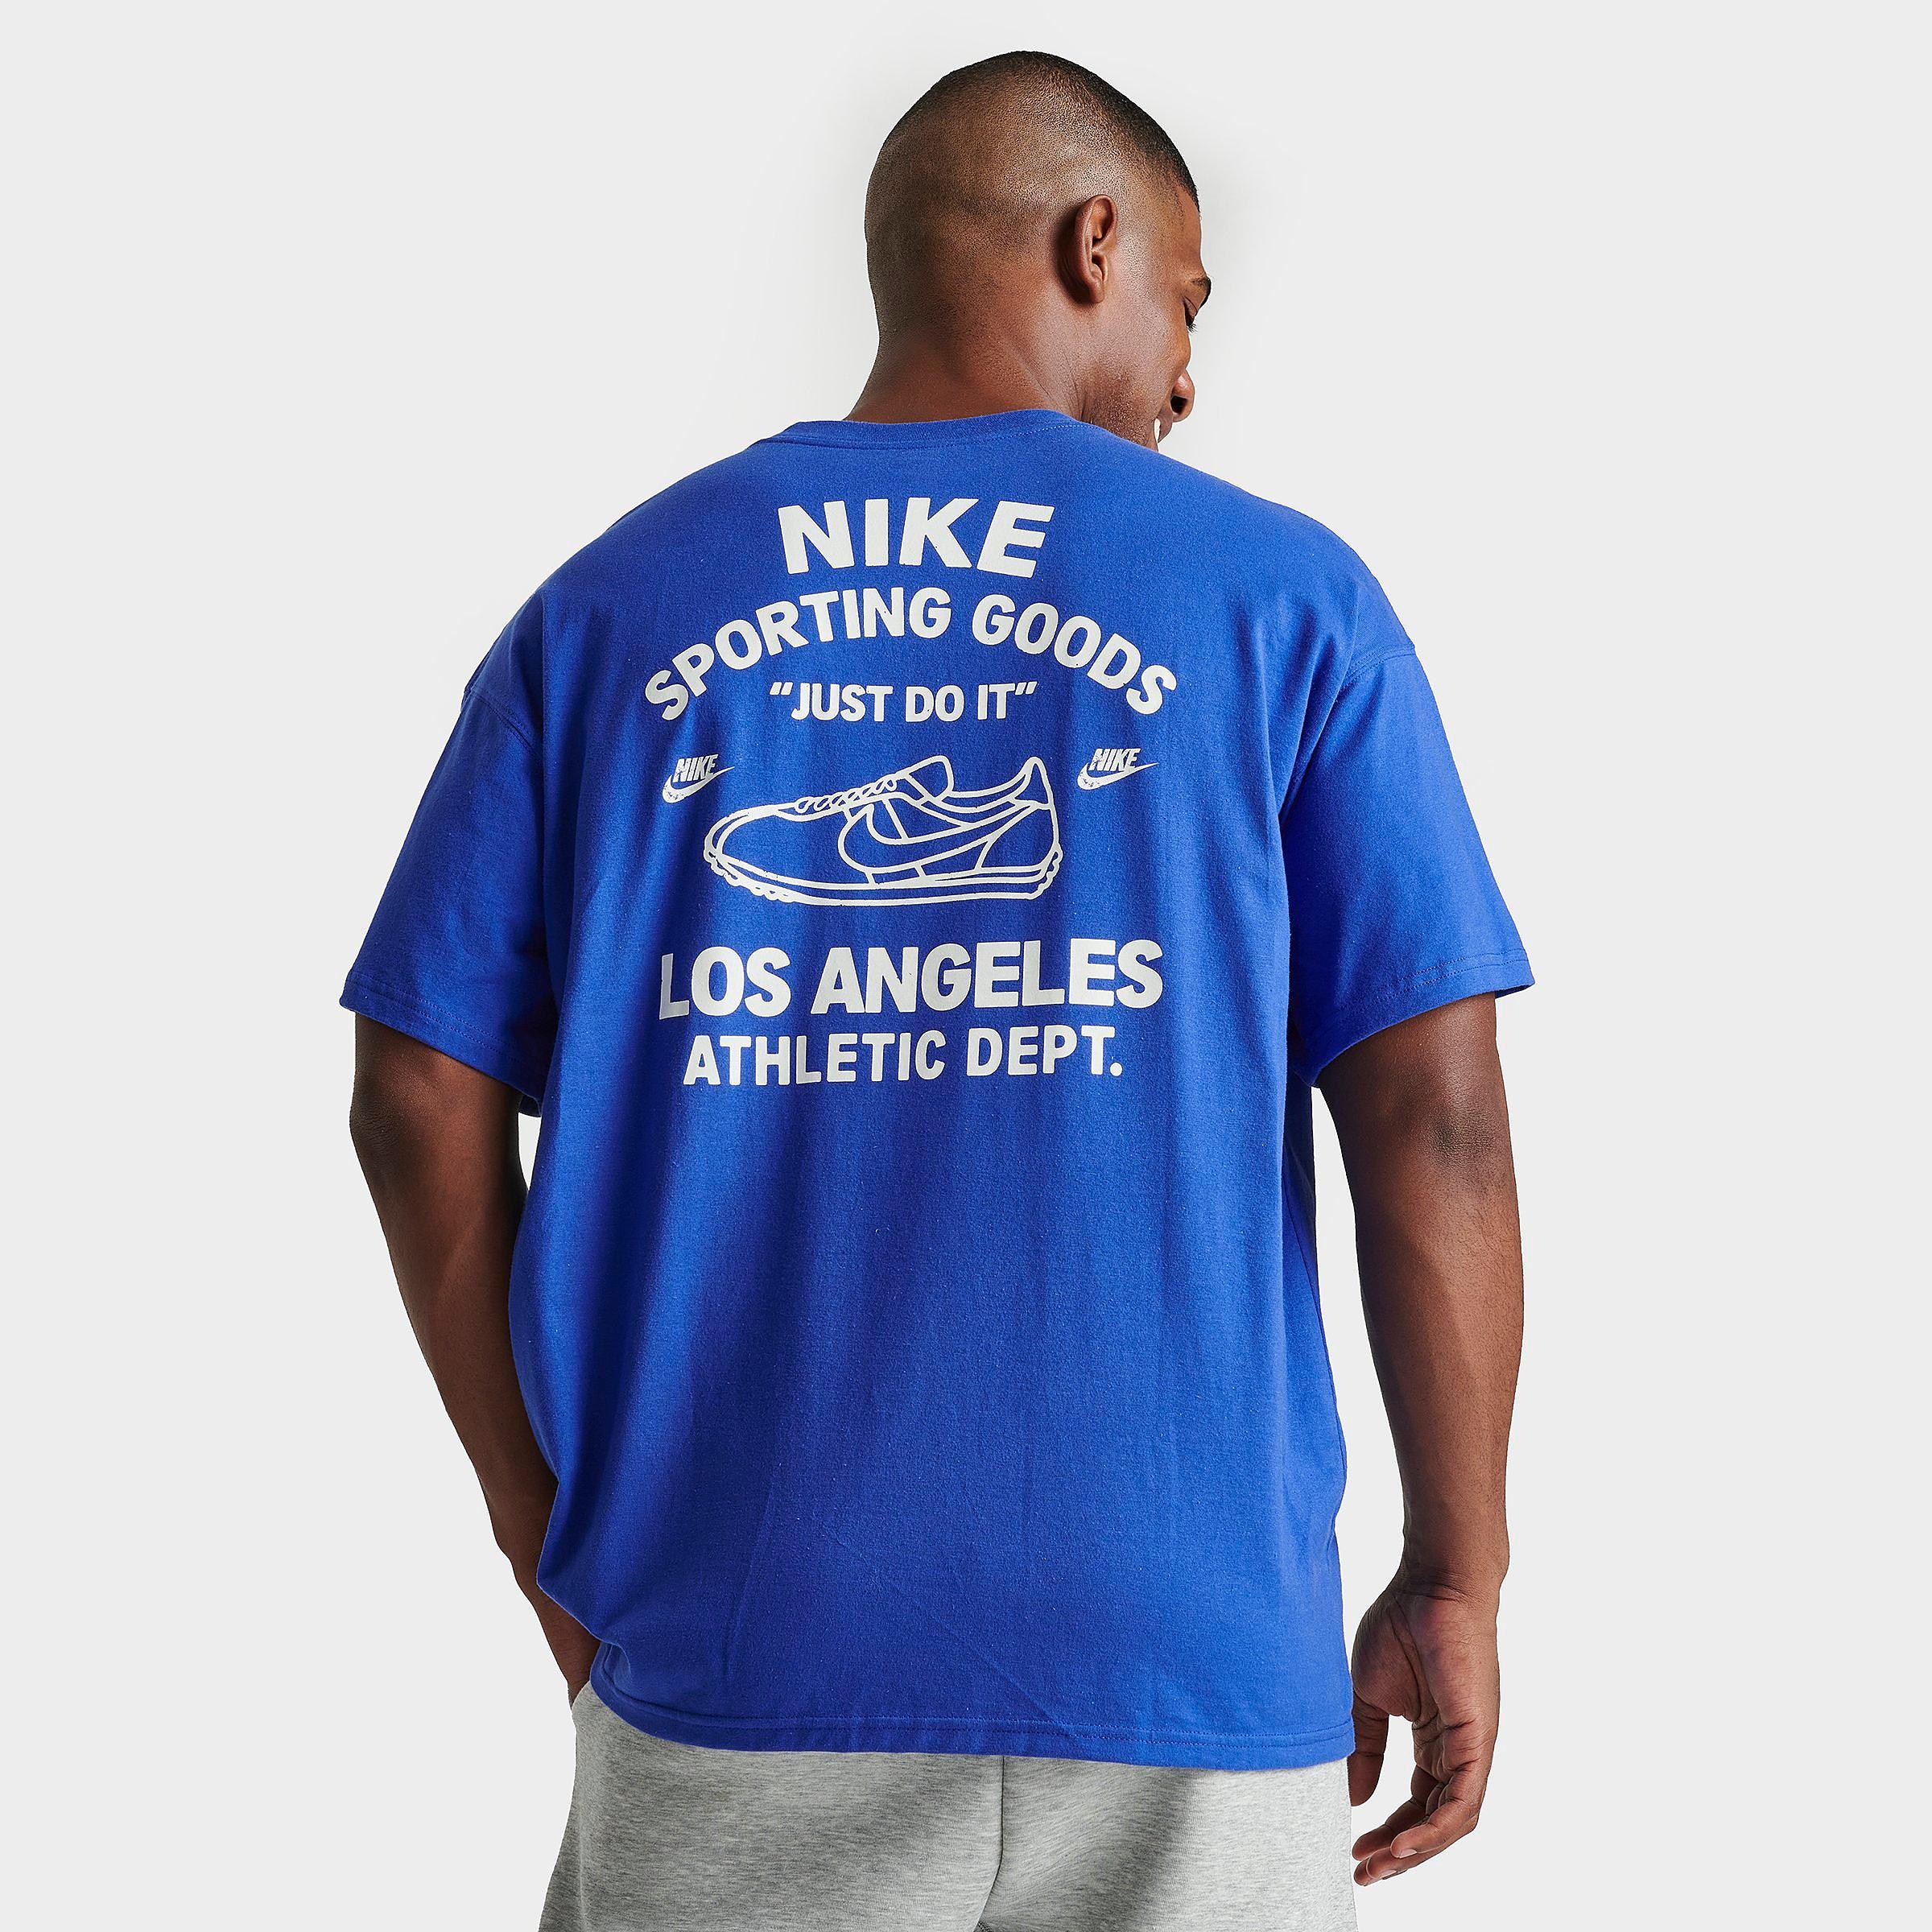 Mens Nike Sportswear Athletic Dept Sporting Goods Graphic T-Shirt